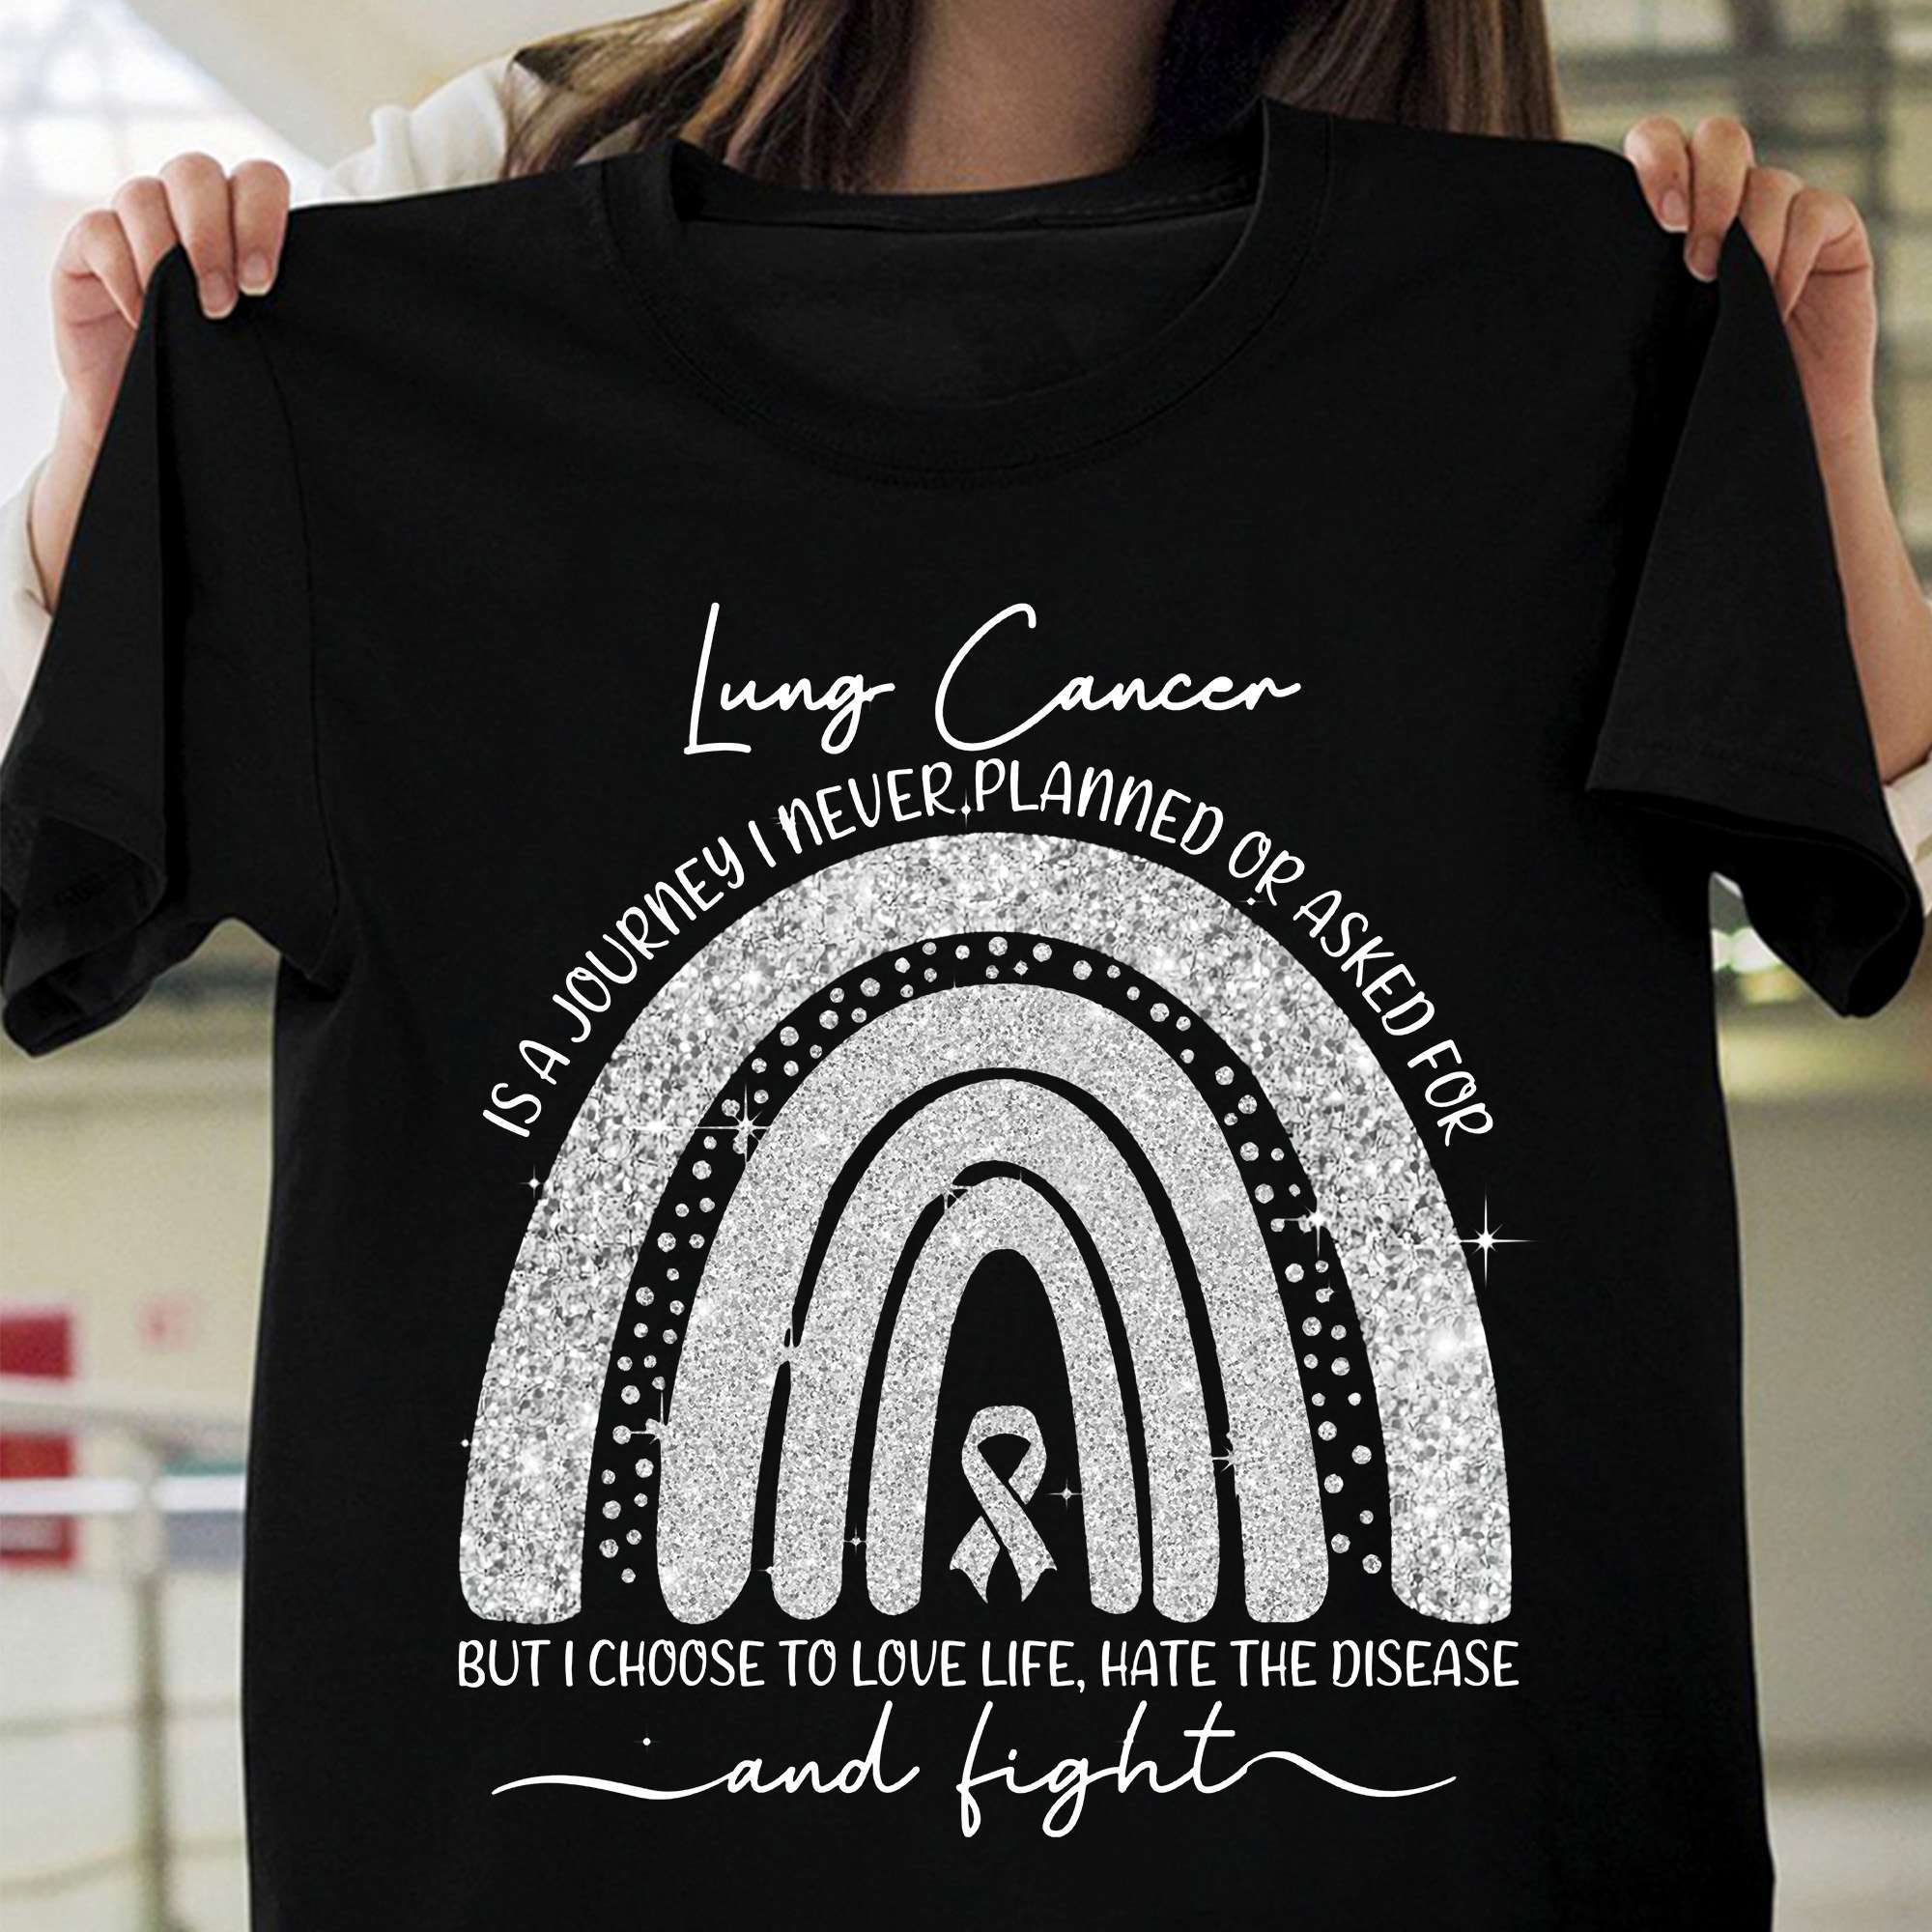 Lung cancer is a journey I never planned or asked for but I choose to love life, hate the disease - Lung cancer awareness